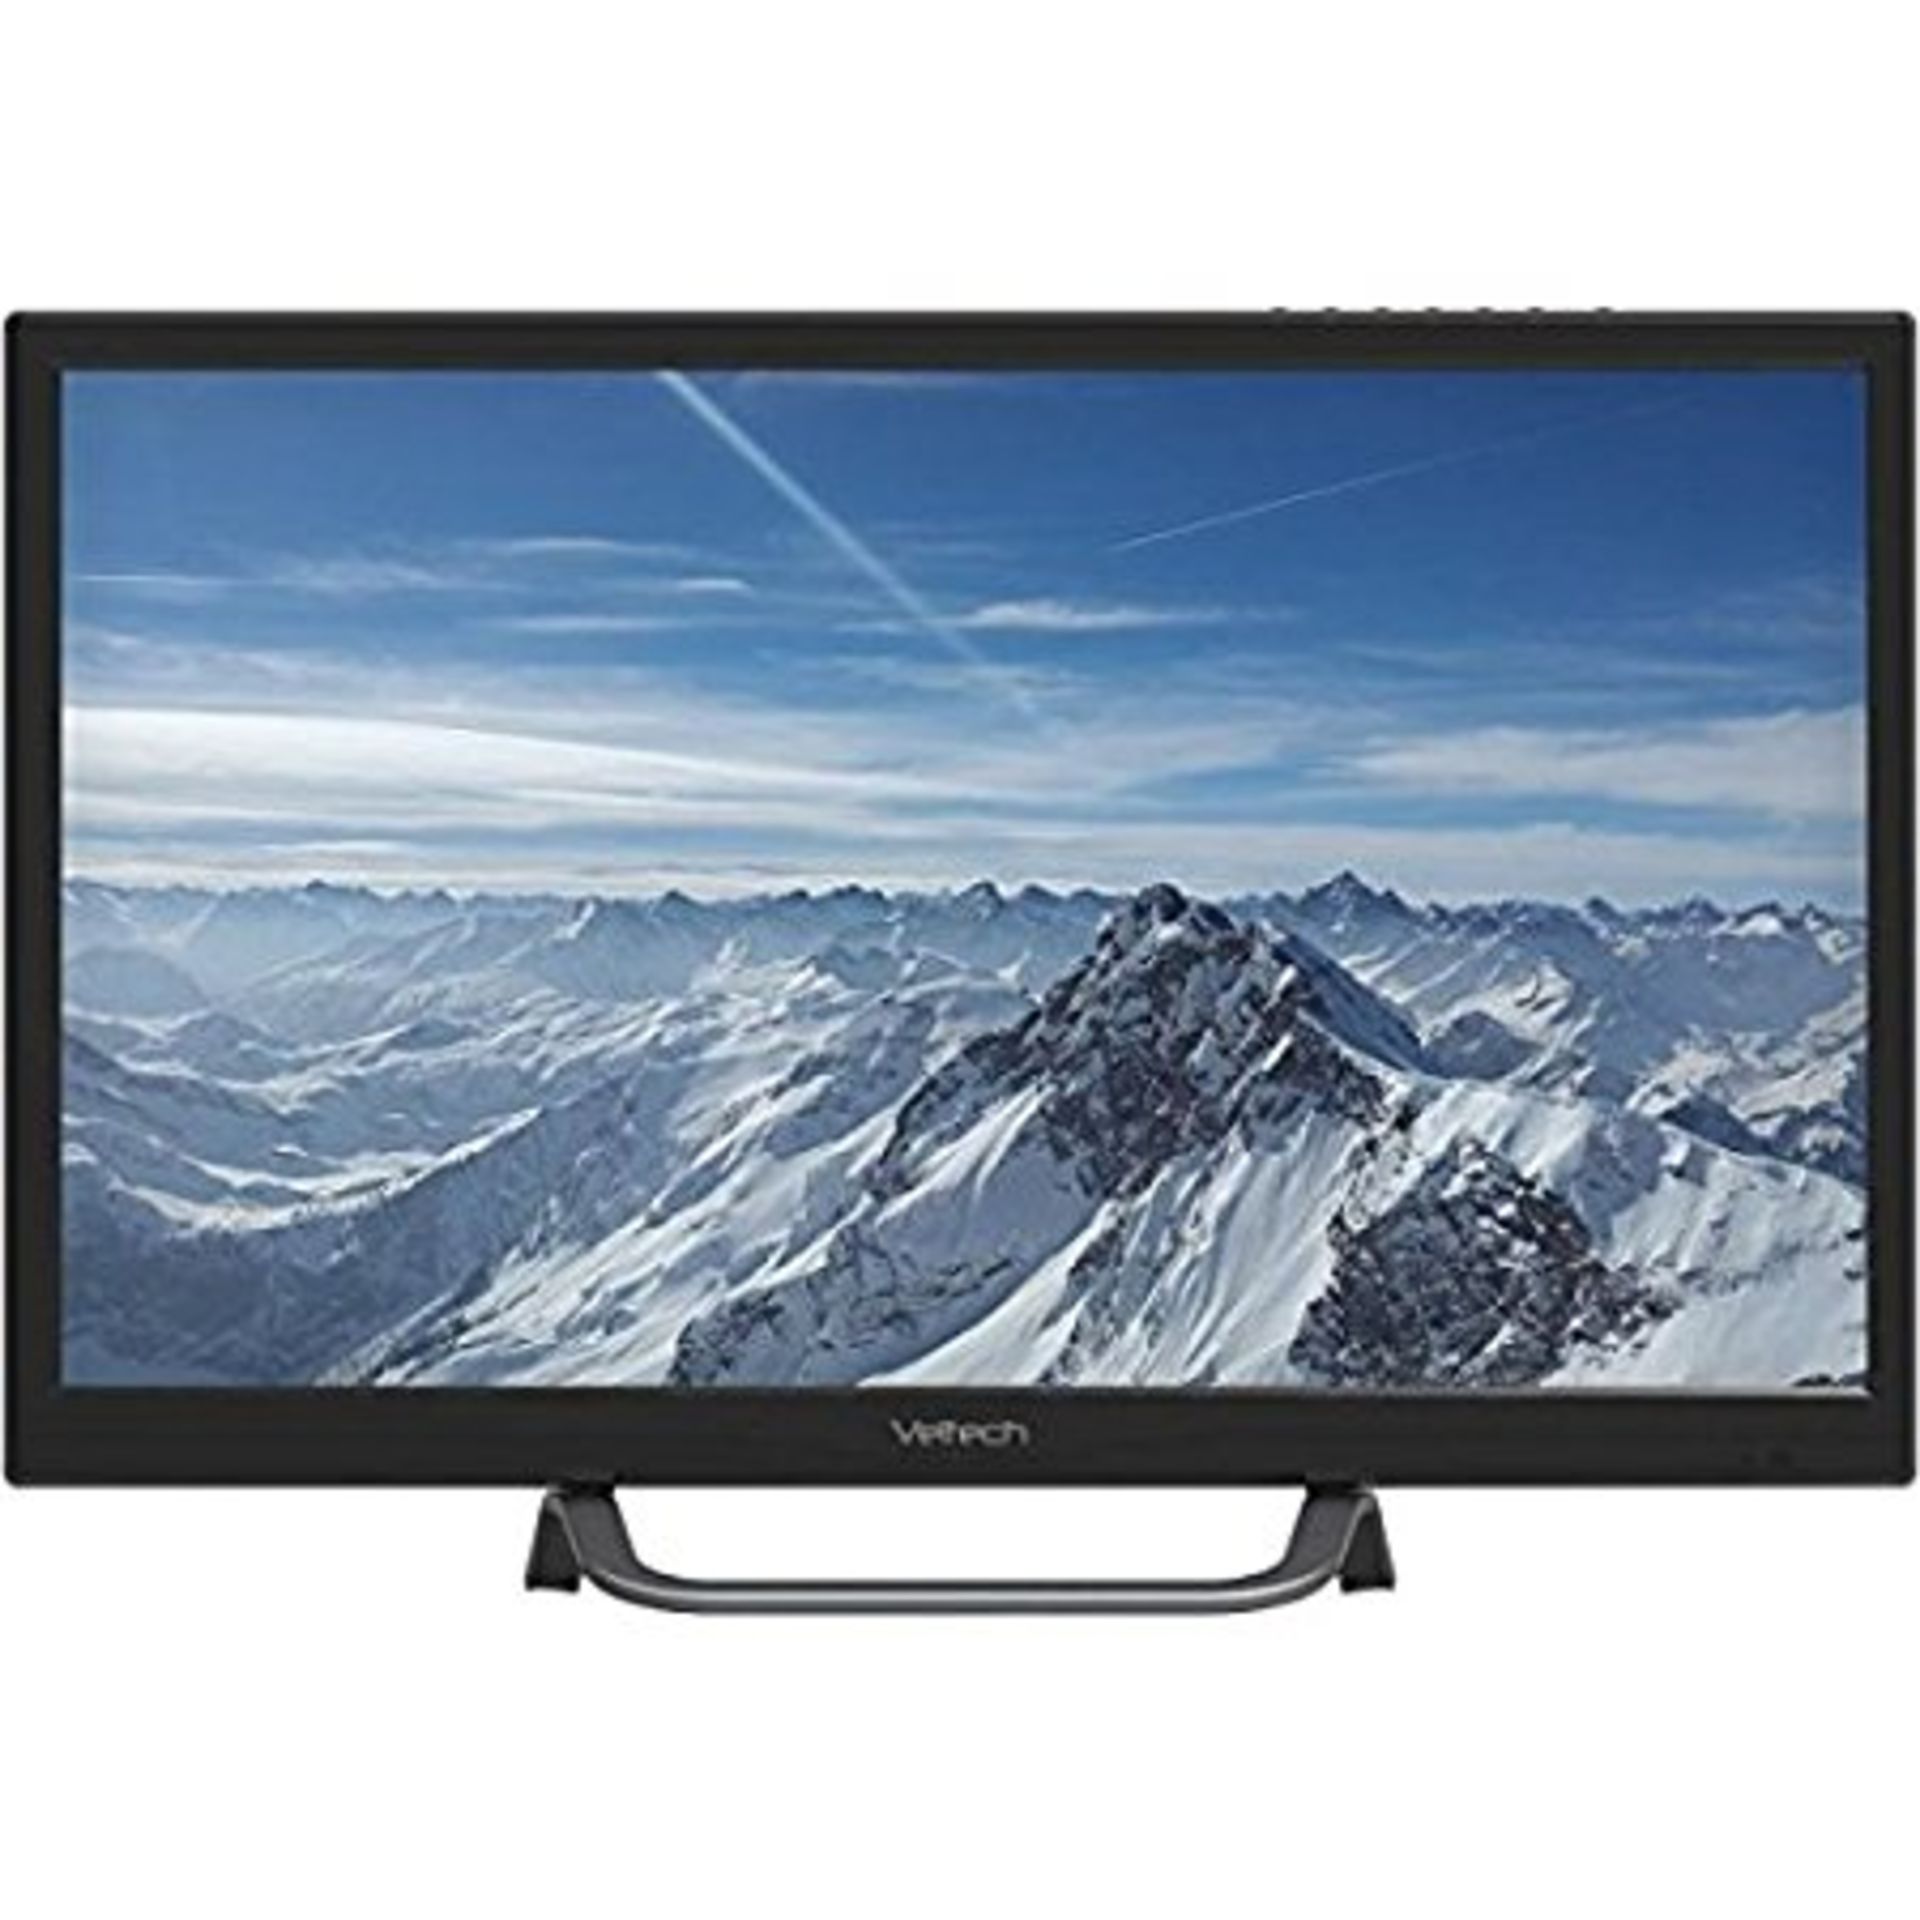 V Grade A 24" Widescreen LED TV - Freeview - HD Ready - HDMI - USB - TV-24VEL24GY15-B - Stand May